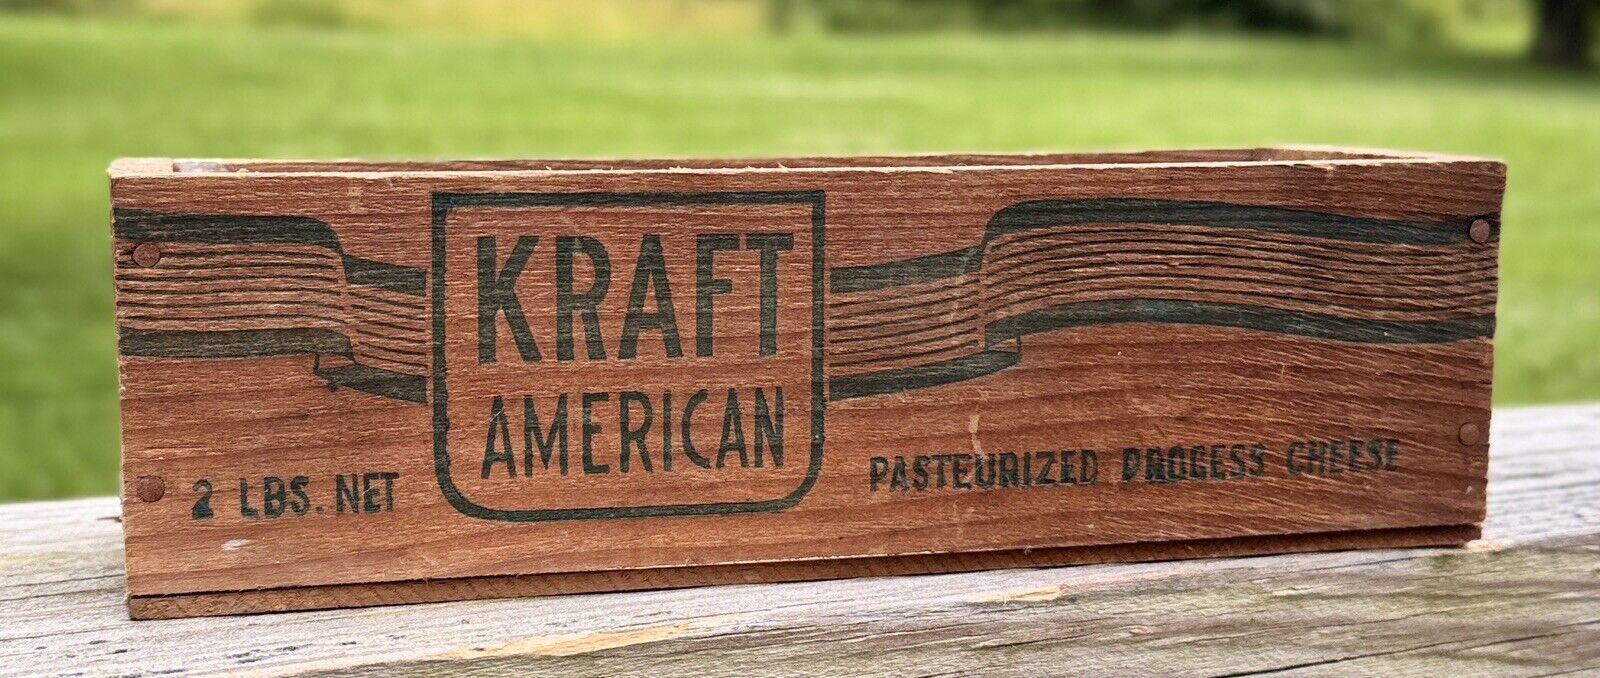 Antique Kraft American Cheese Wooden Box 2 lbs Chicago IL